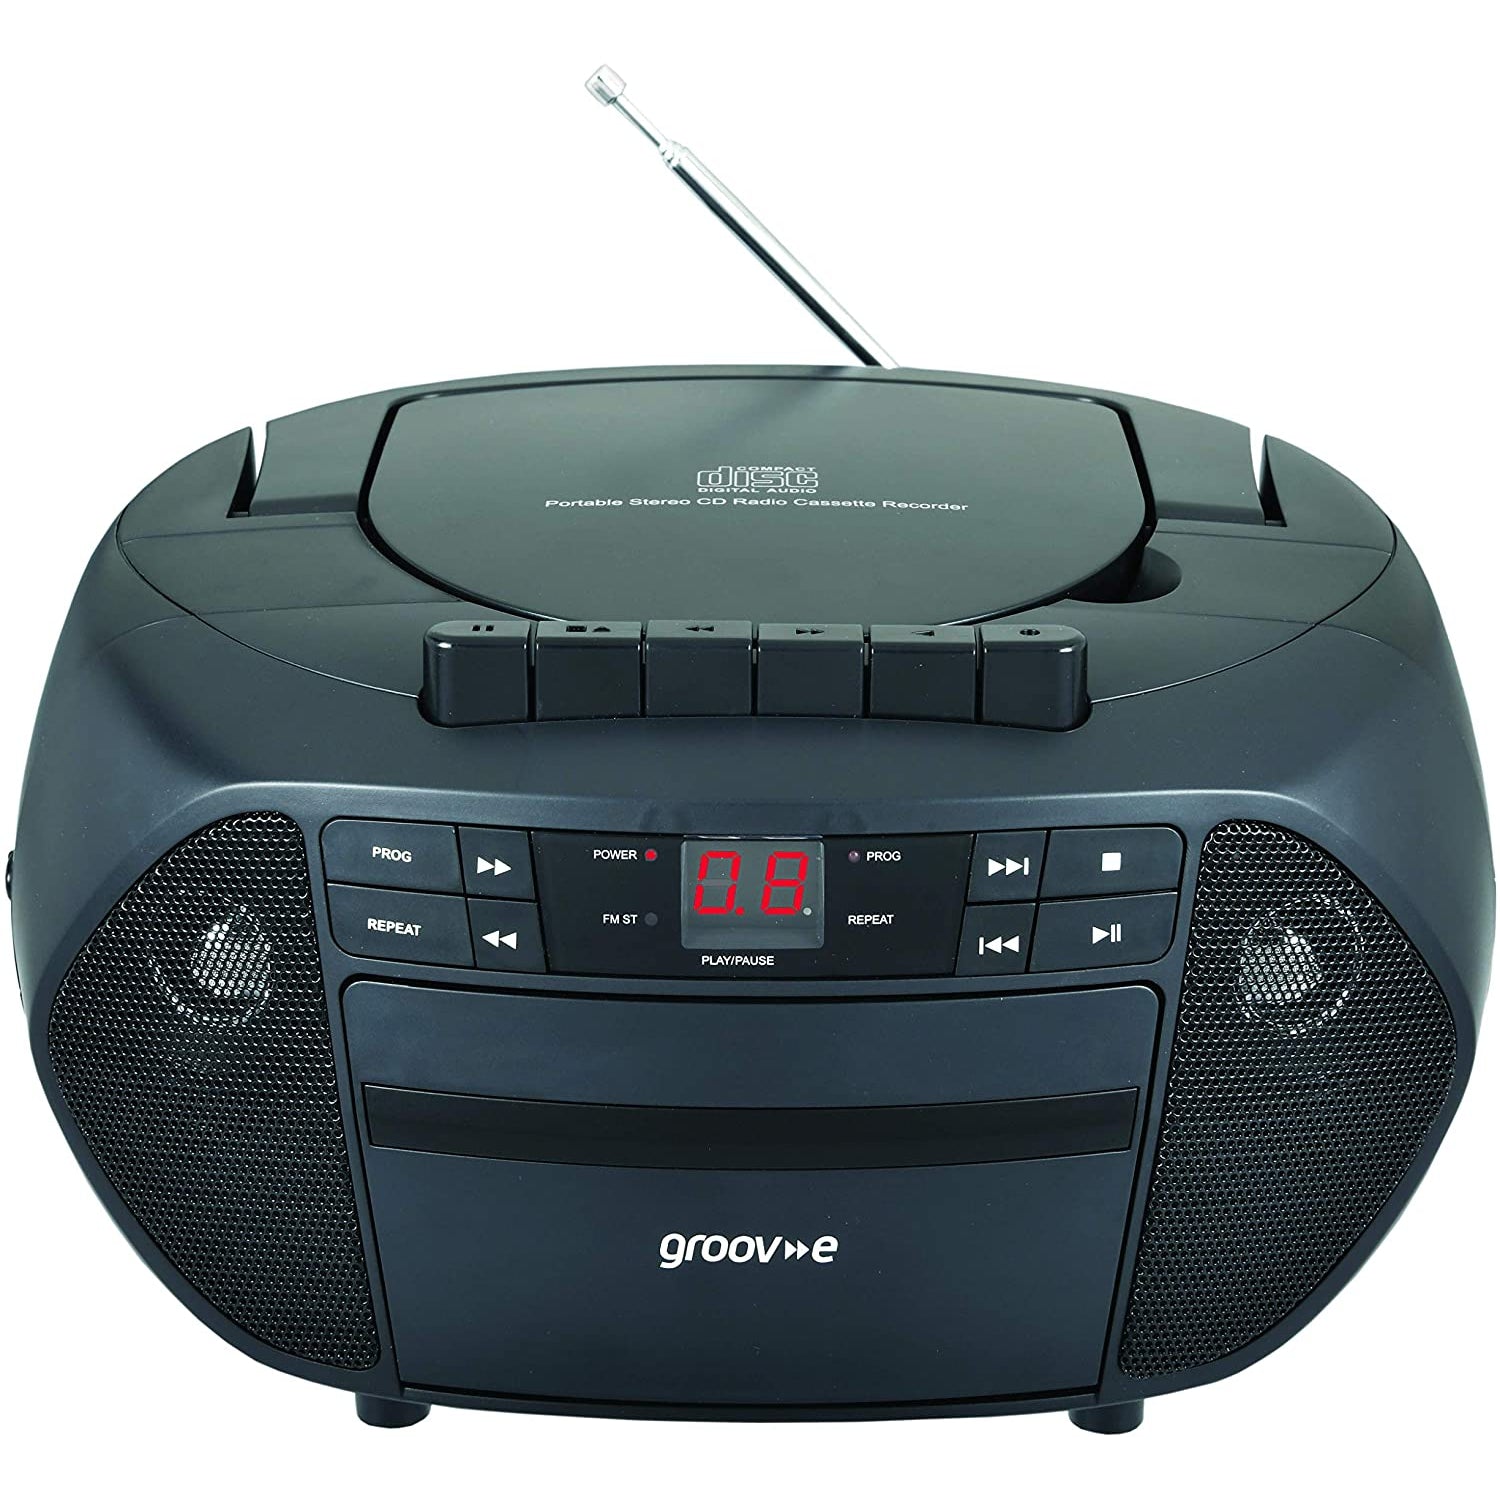 Black Stereo Portable Cassette Player, Recorder and Radio